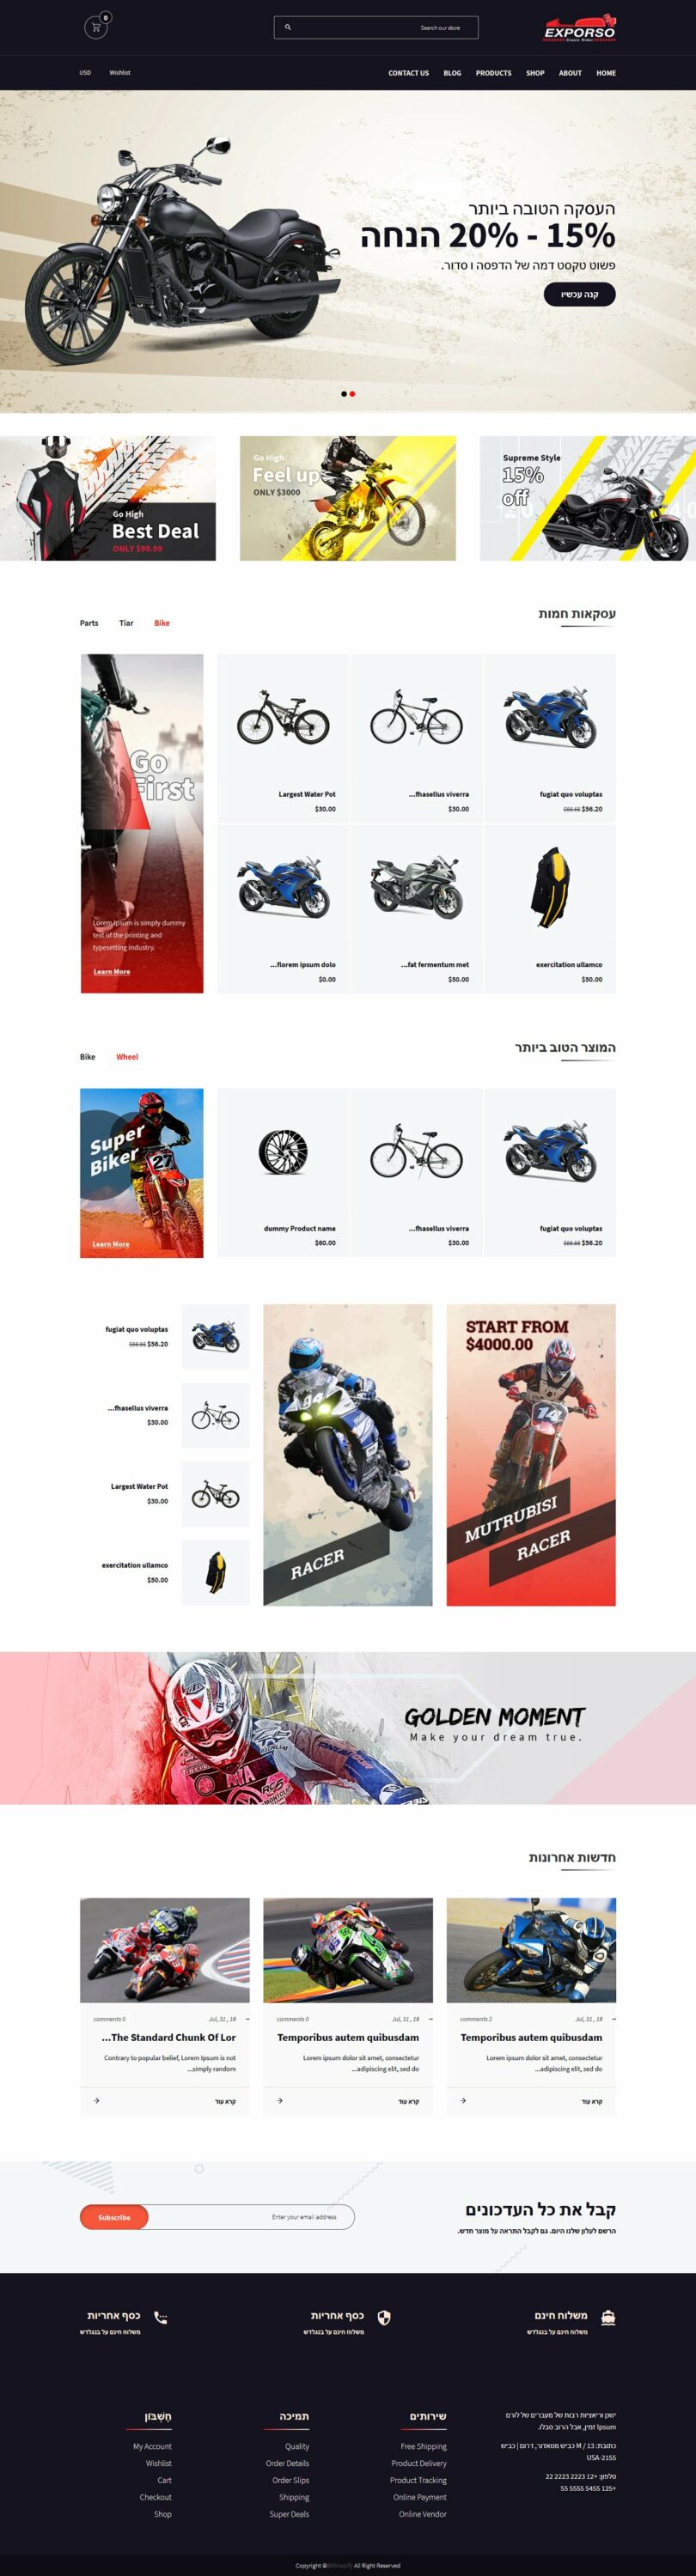 Beautiful images of motorcycles in a template.